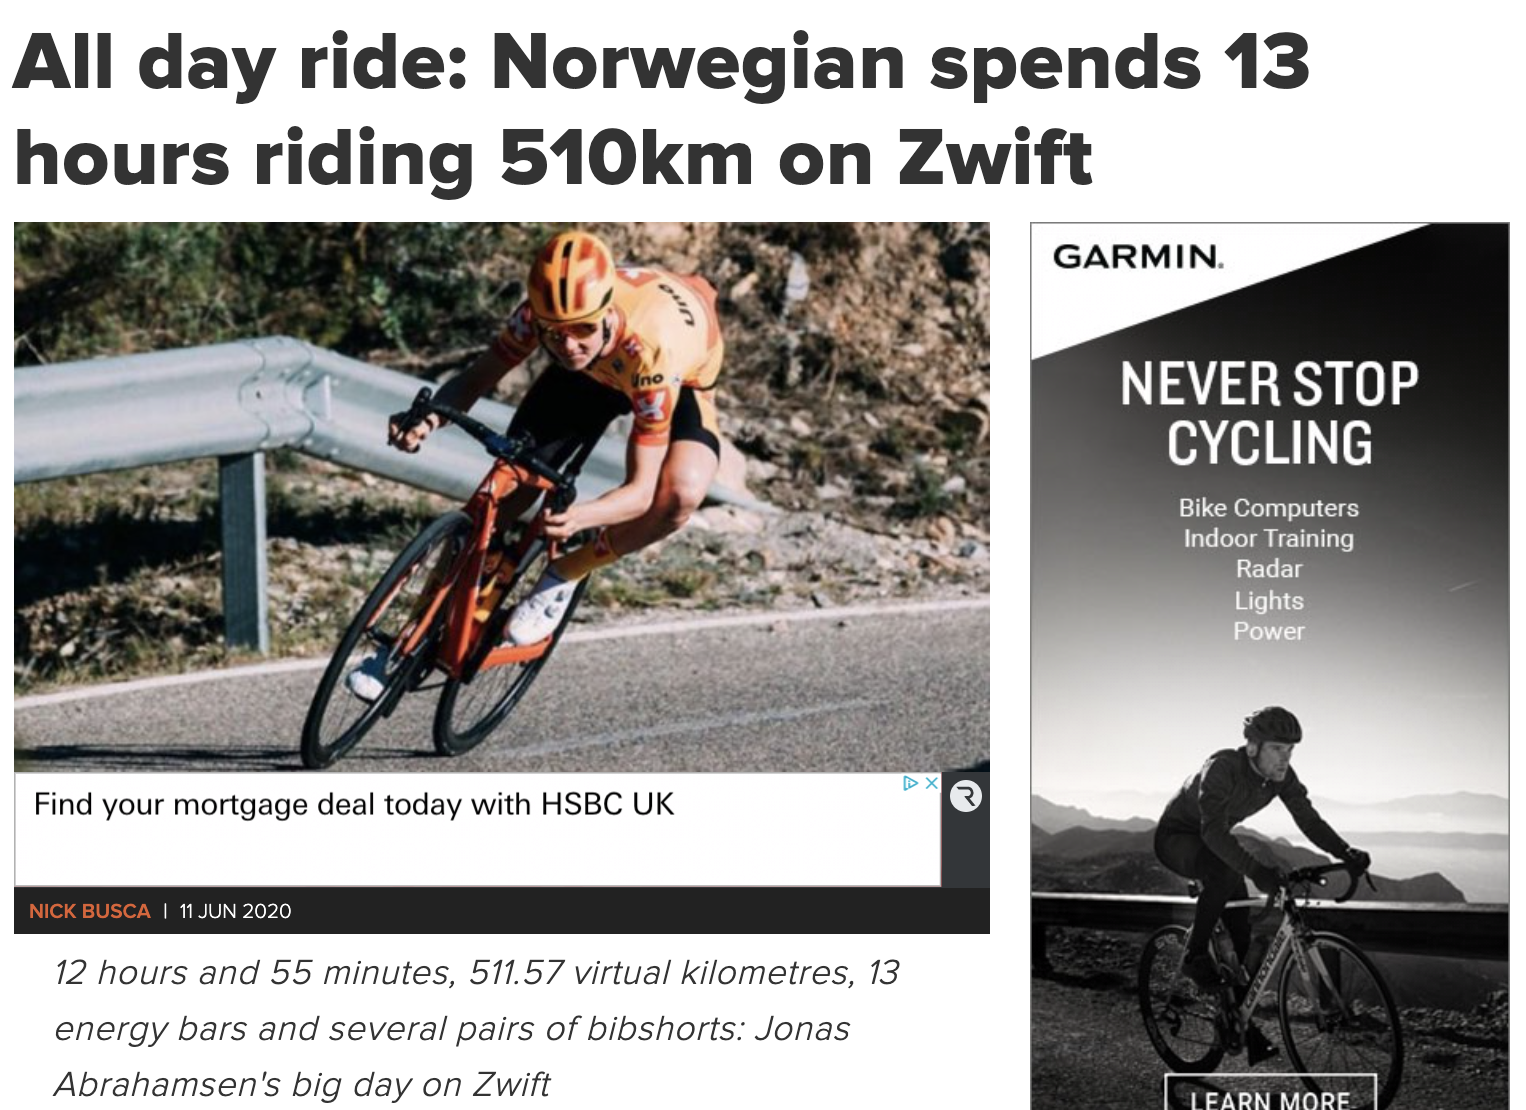 All day ride: Norwegian spends 13 hours riding 510km on Zwift